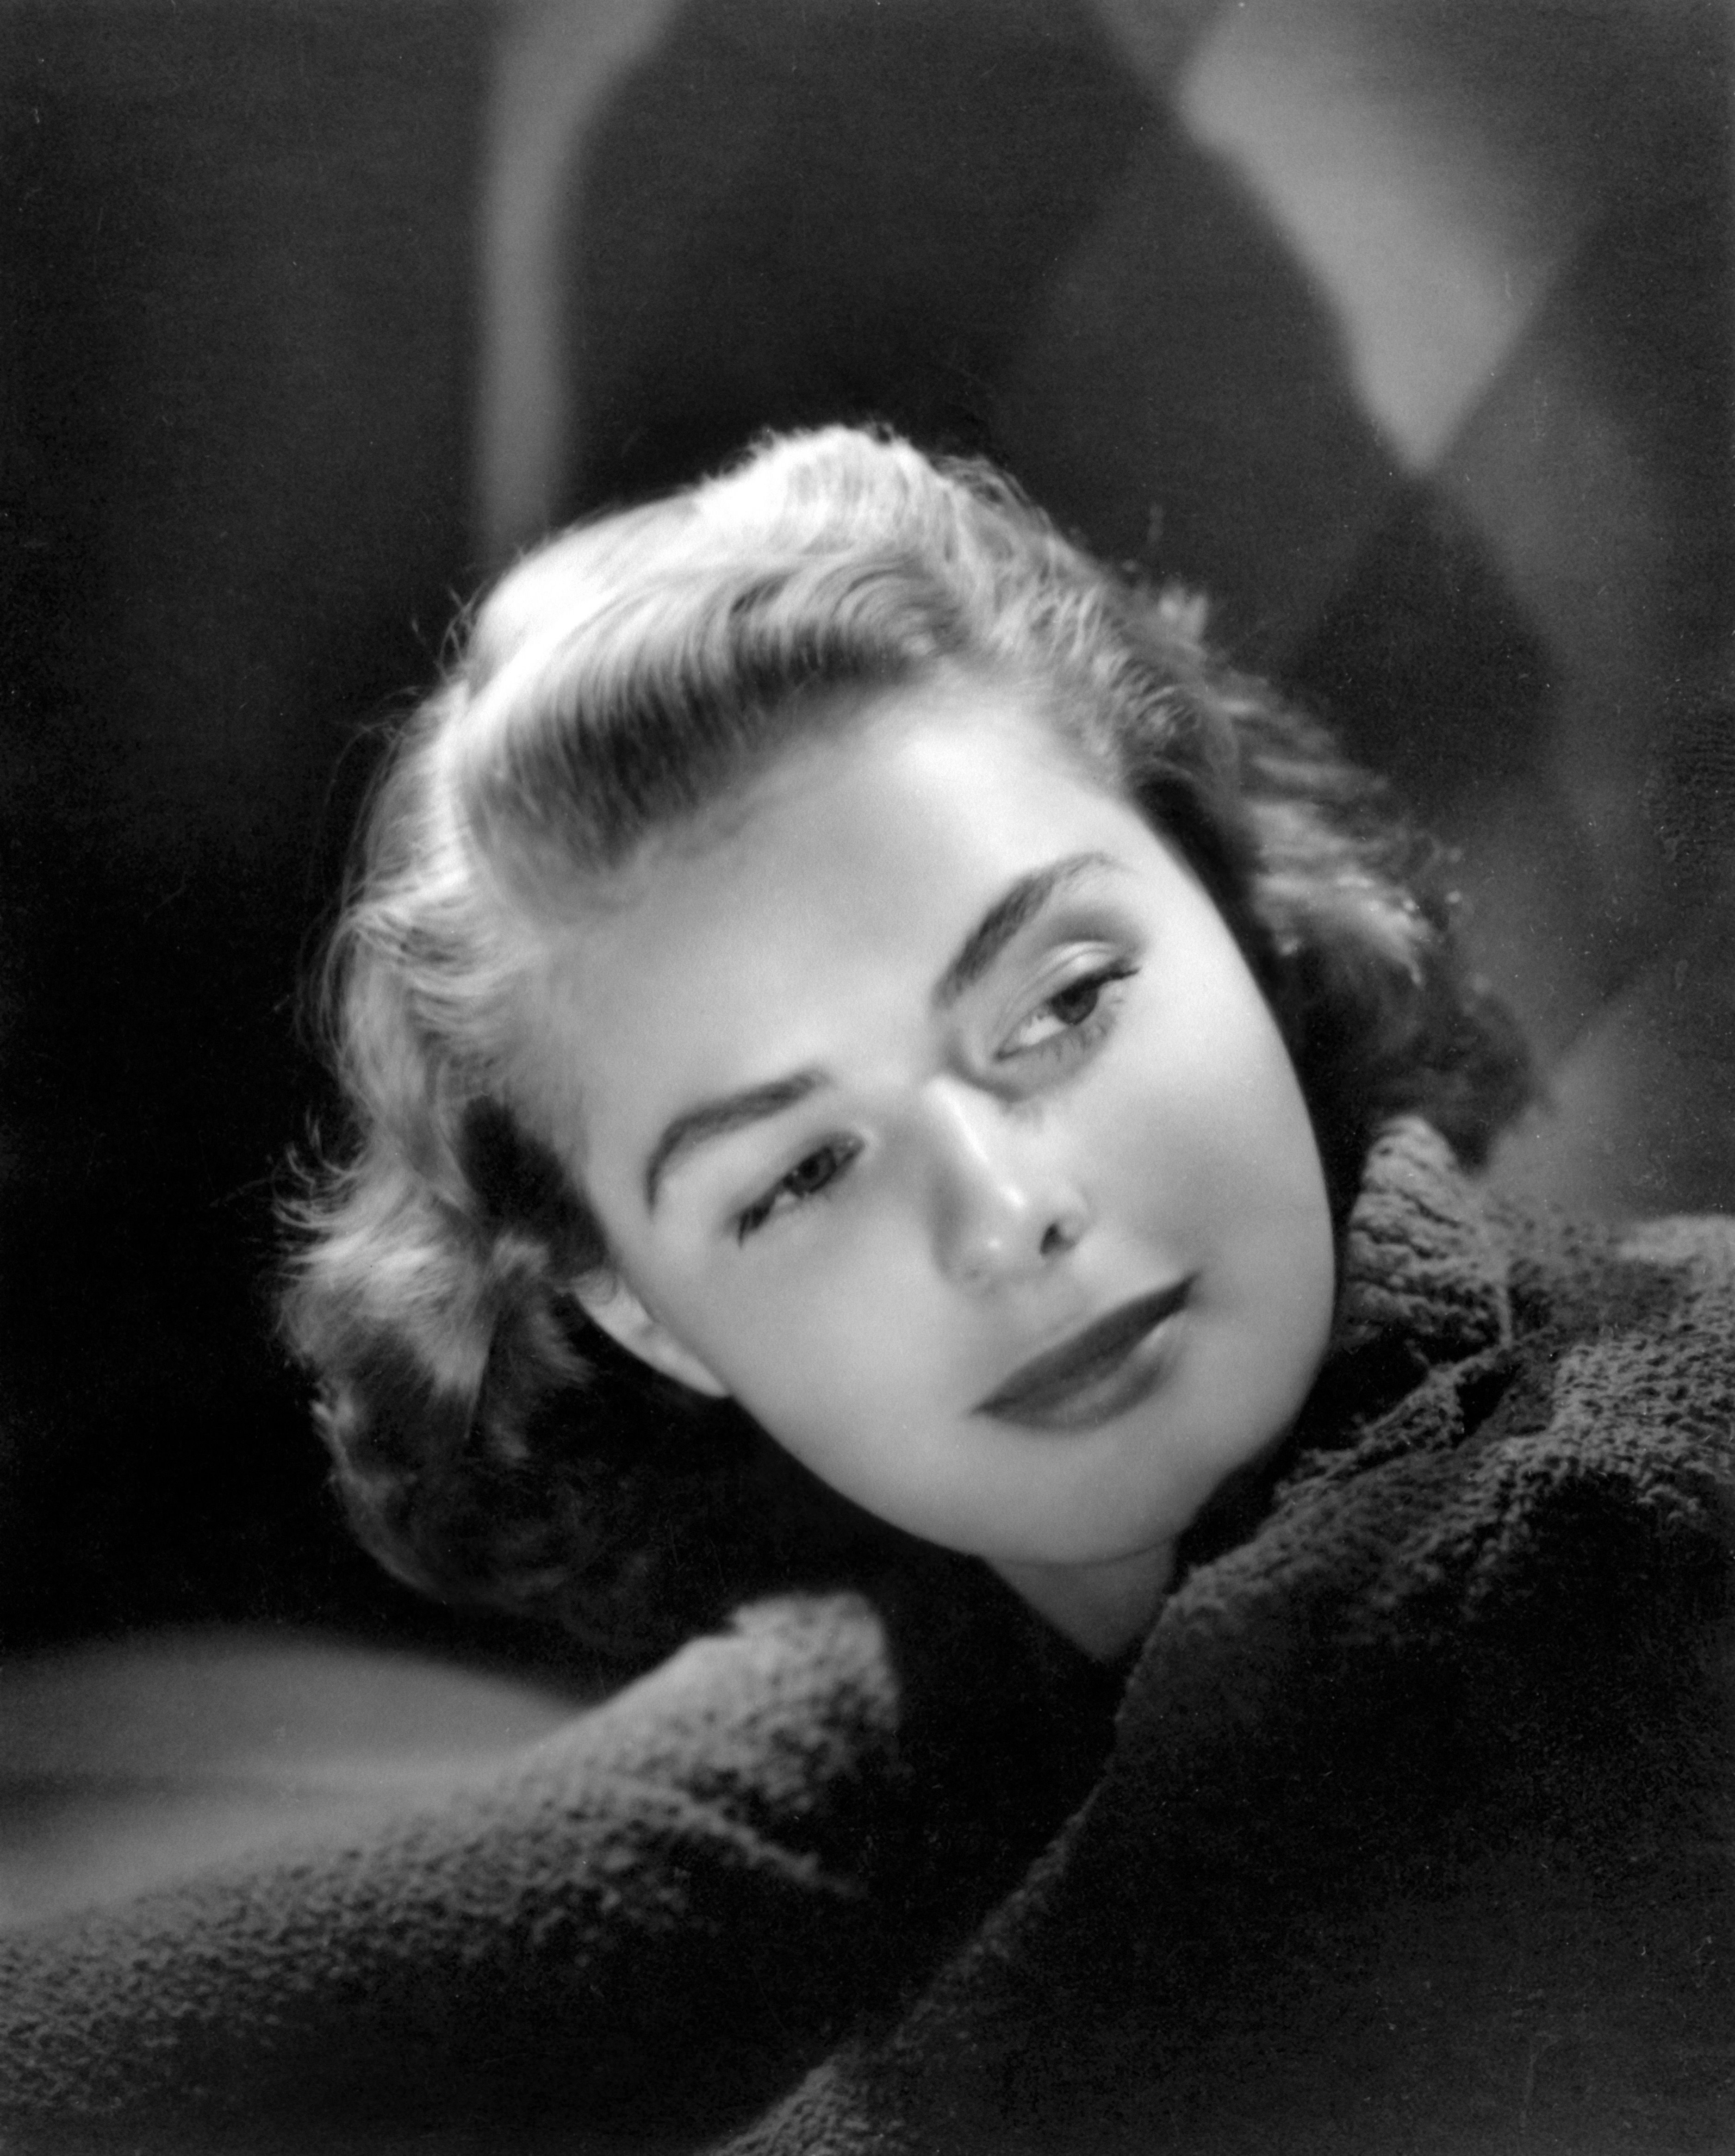 Ingrid Bergman photographed by Laszlo Willinger for a studio portrait in 1940 | Source: Getty Images